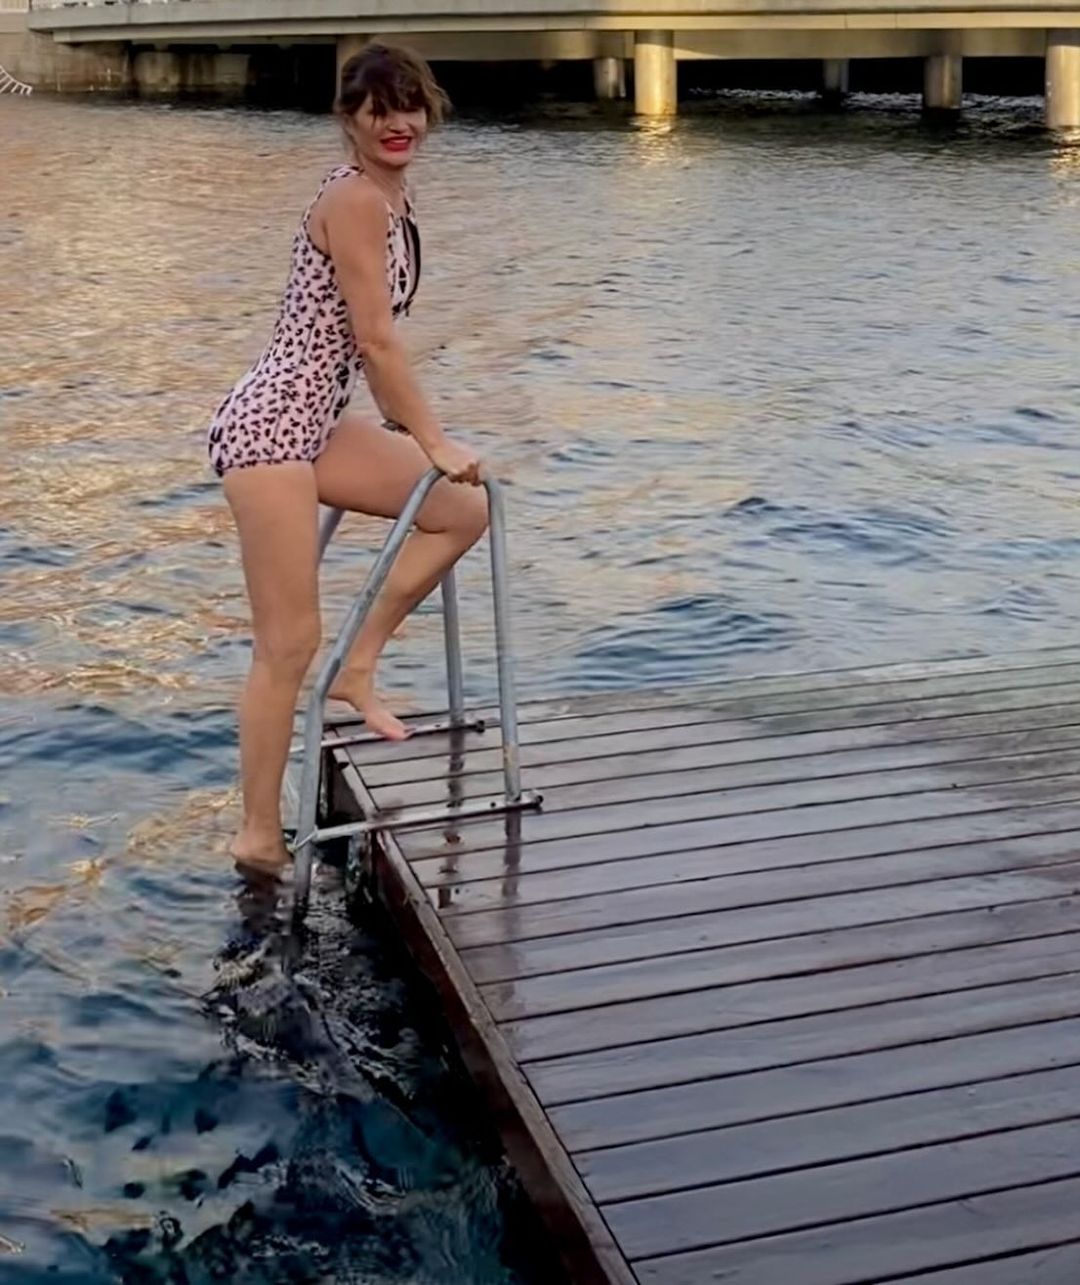 Photos n°1 : Helena Christensen Keeps Her Cold Plunge Tradition Going!